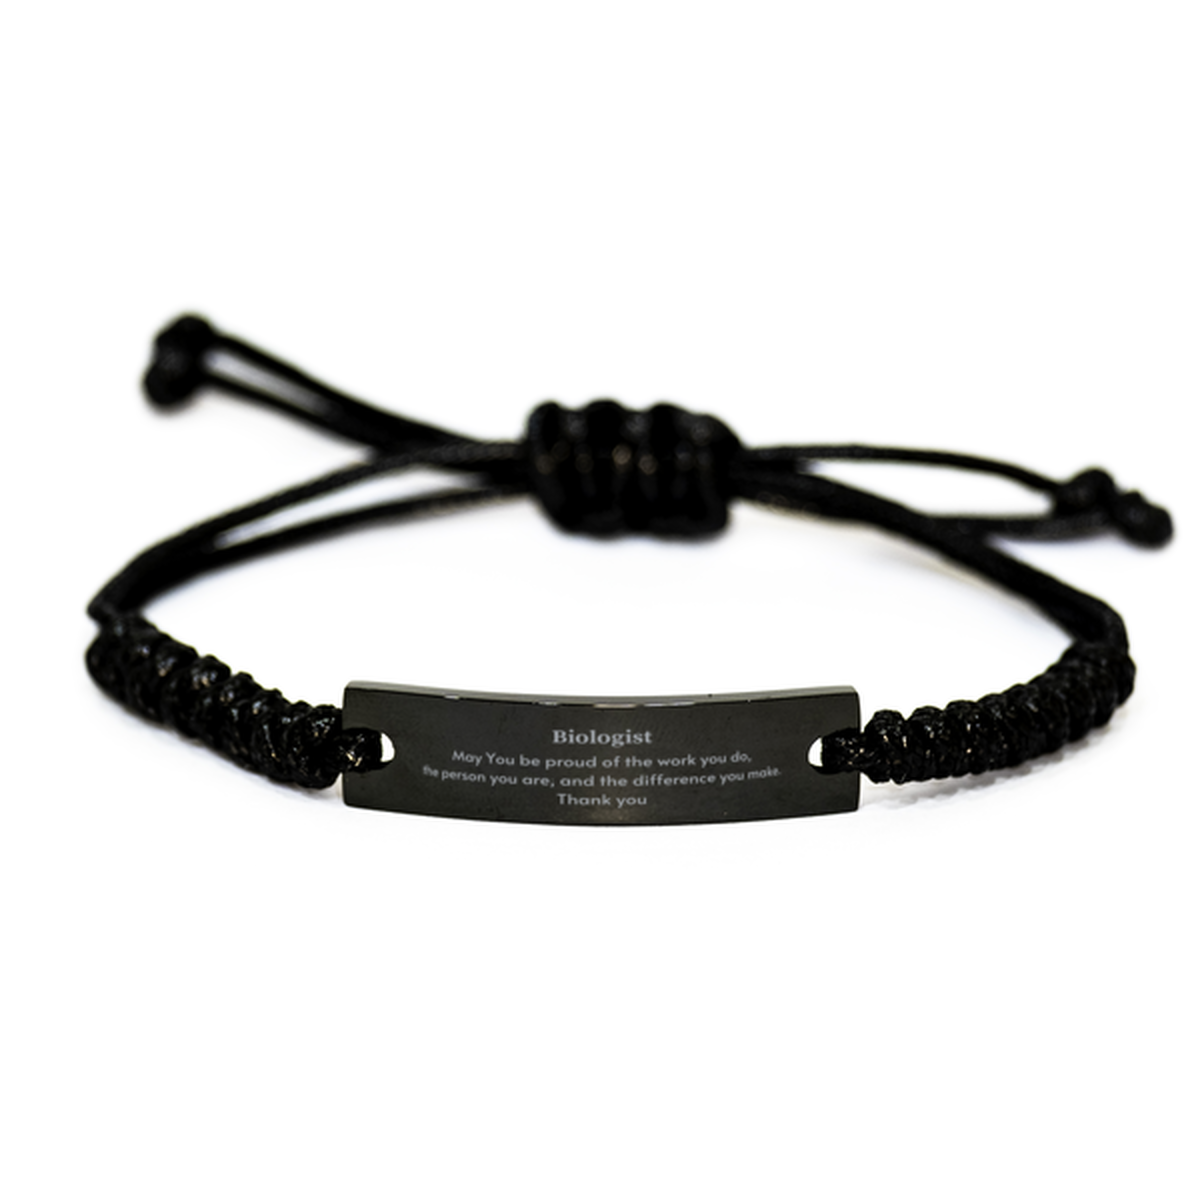 Heartwarming Black Rope Bracelet Retirement Coworkers Gifts for Biologist, Biologist May You be proud of the work you do, the person you are Gifts for Boss Men Women Friends